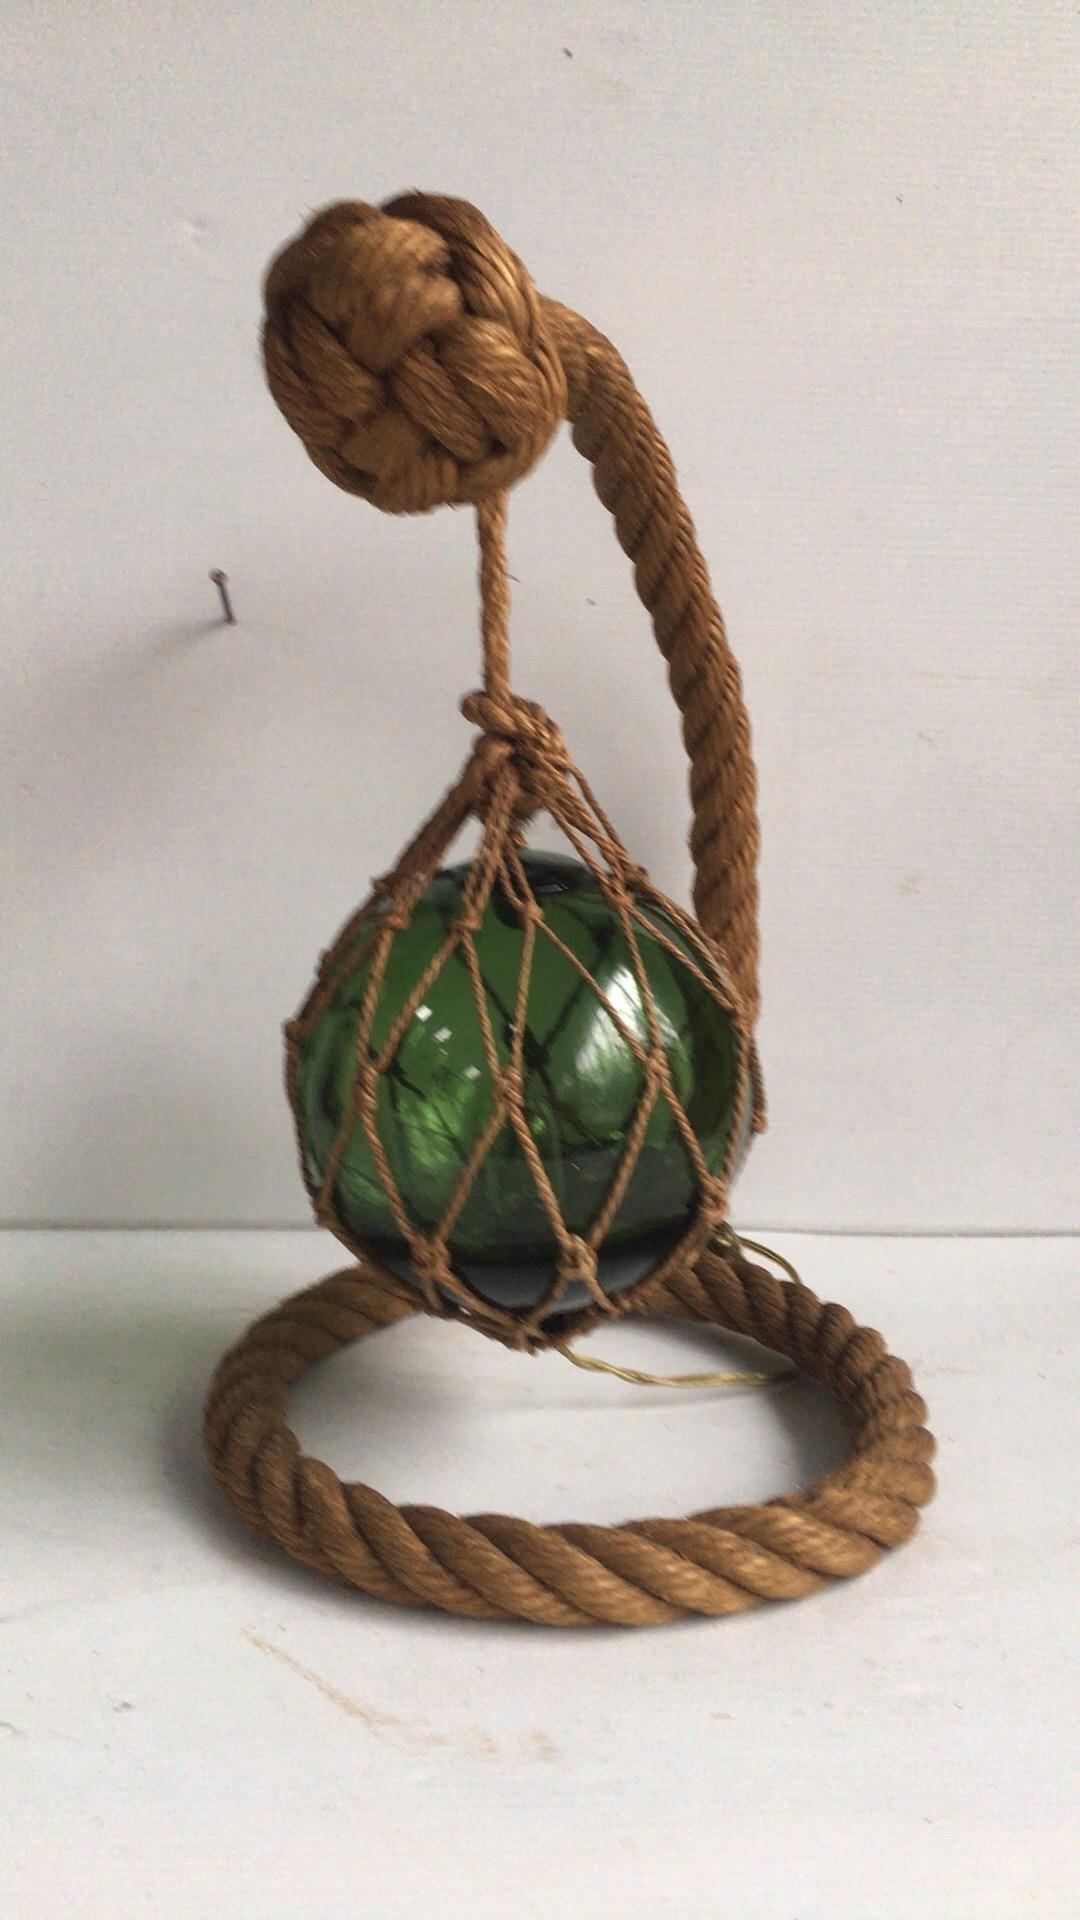 Midcentury rope lamp by Audoux Minet with a green glass float, circa 1960.
Measures: Height / 14.5